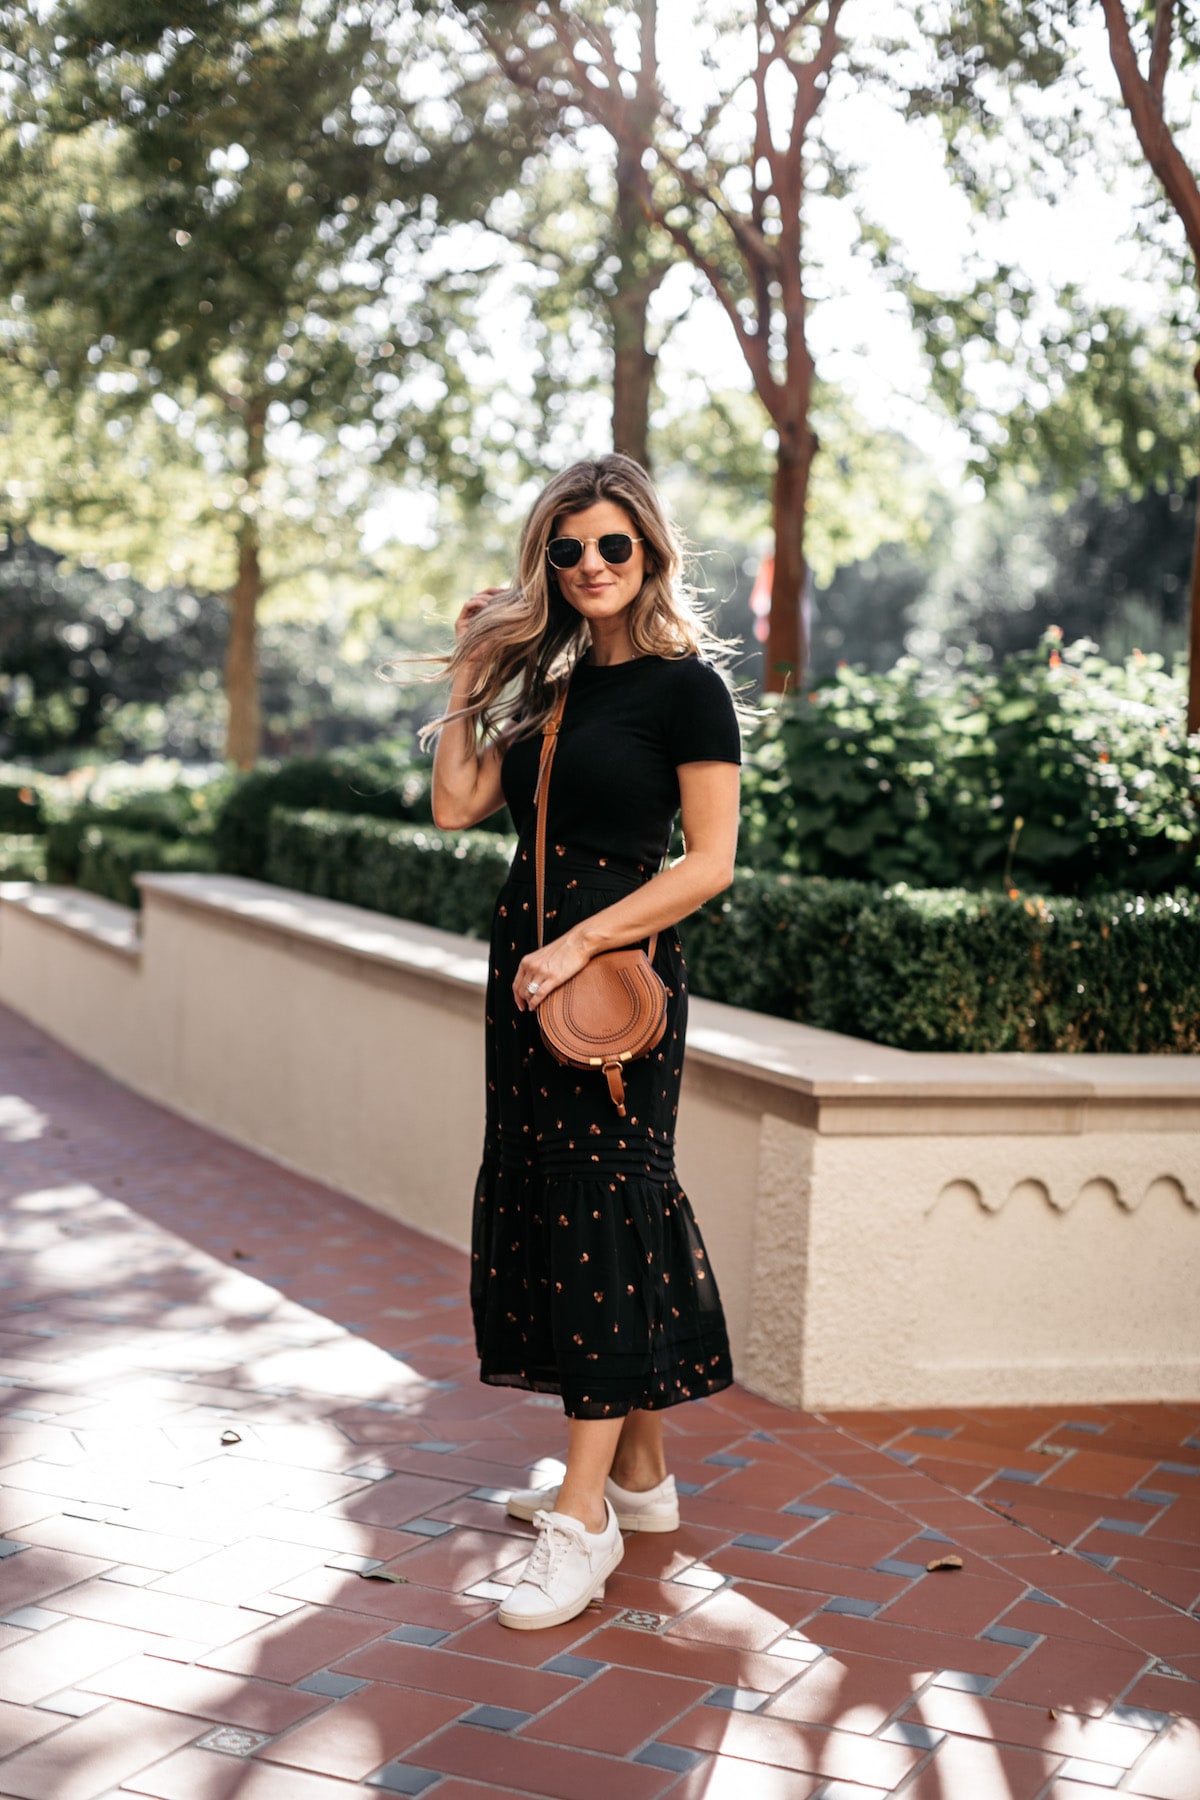 Brighton Butler wearing Madewell Fall Floral Skirt with Black tee and Frye white sneakers